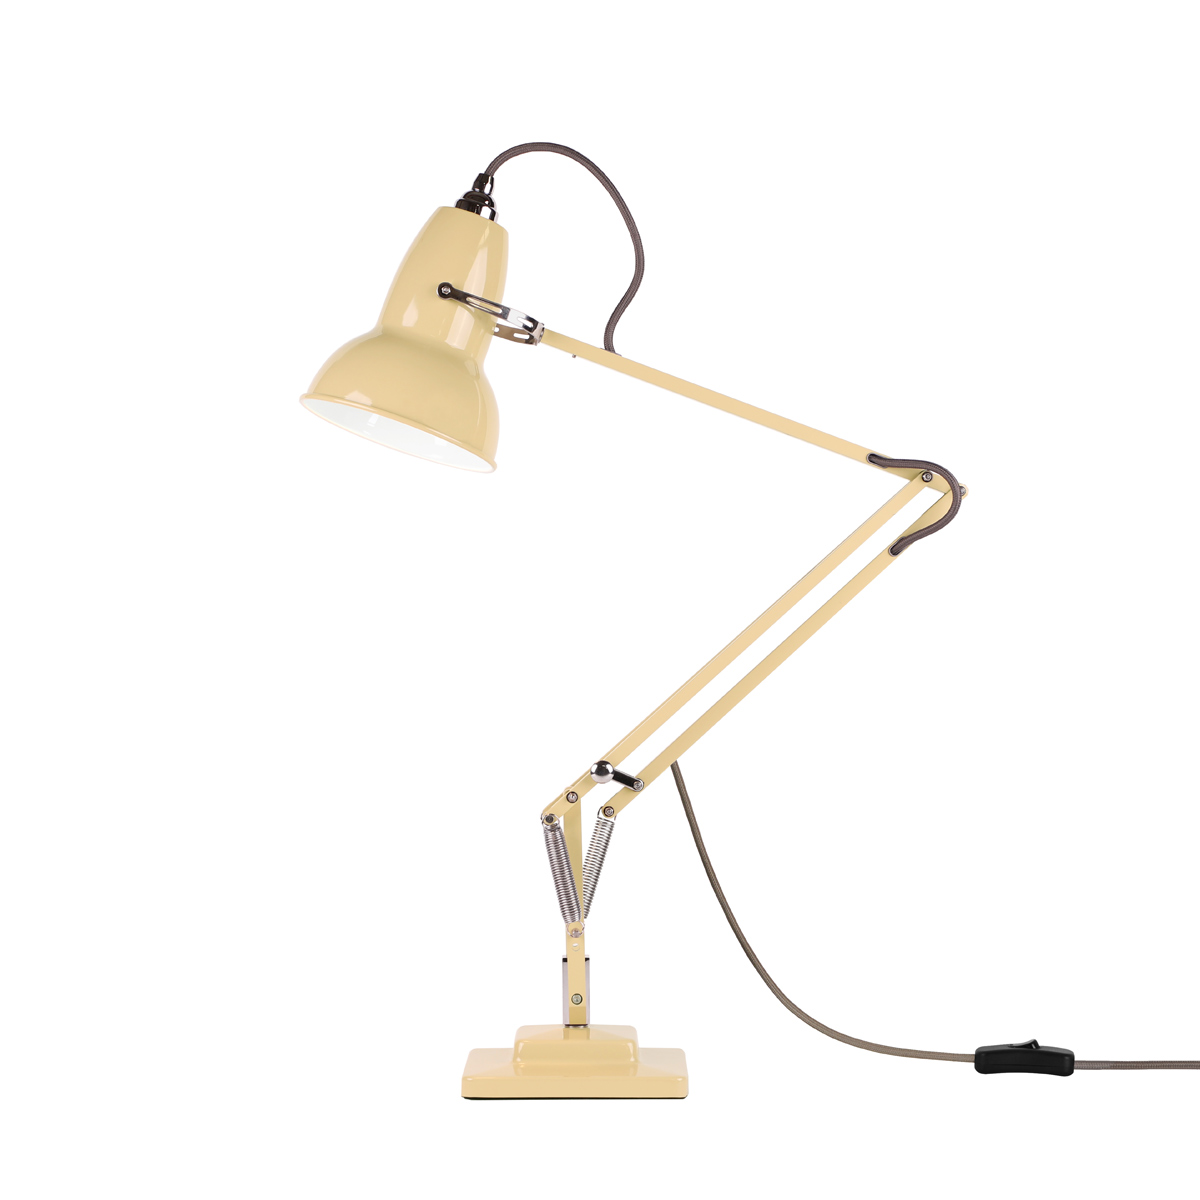 An image of Anglepoise Desk Lamp, National Trust Buttermilk Yellow